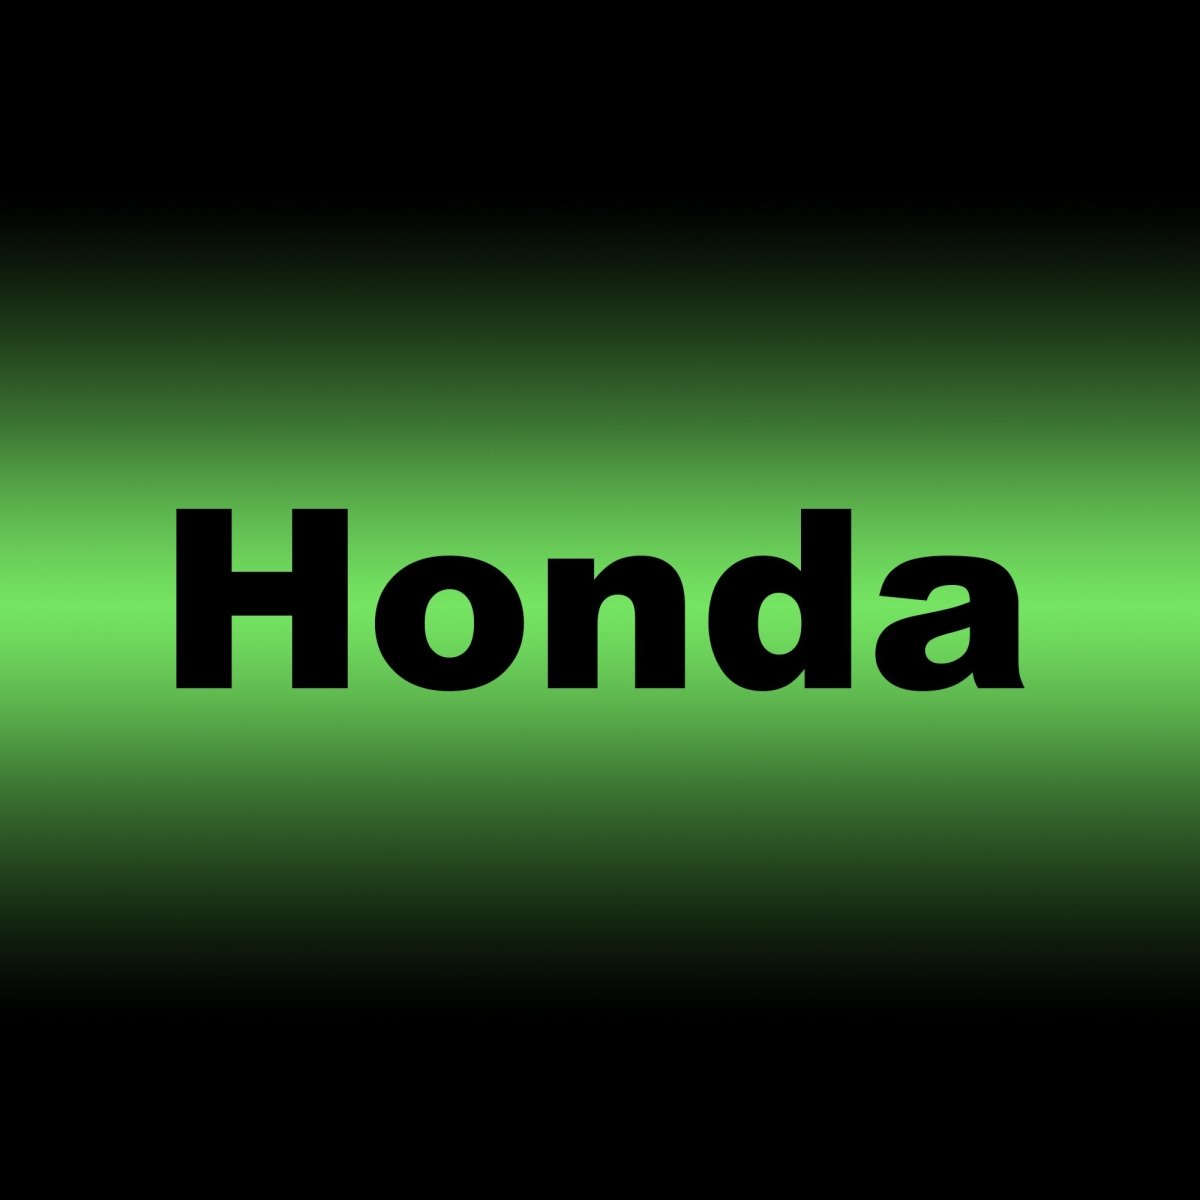 Tailored Car Boot Liner for Honda - Protect Your Boot from Dirt and Damage - Green Flag Shop